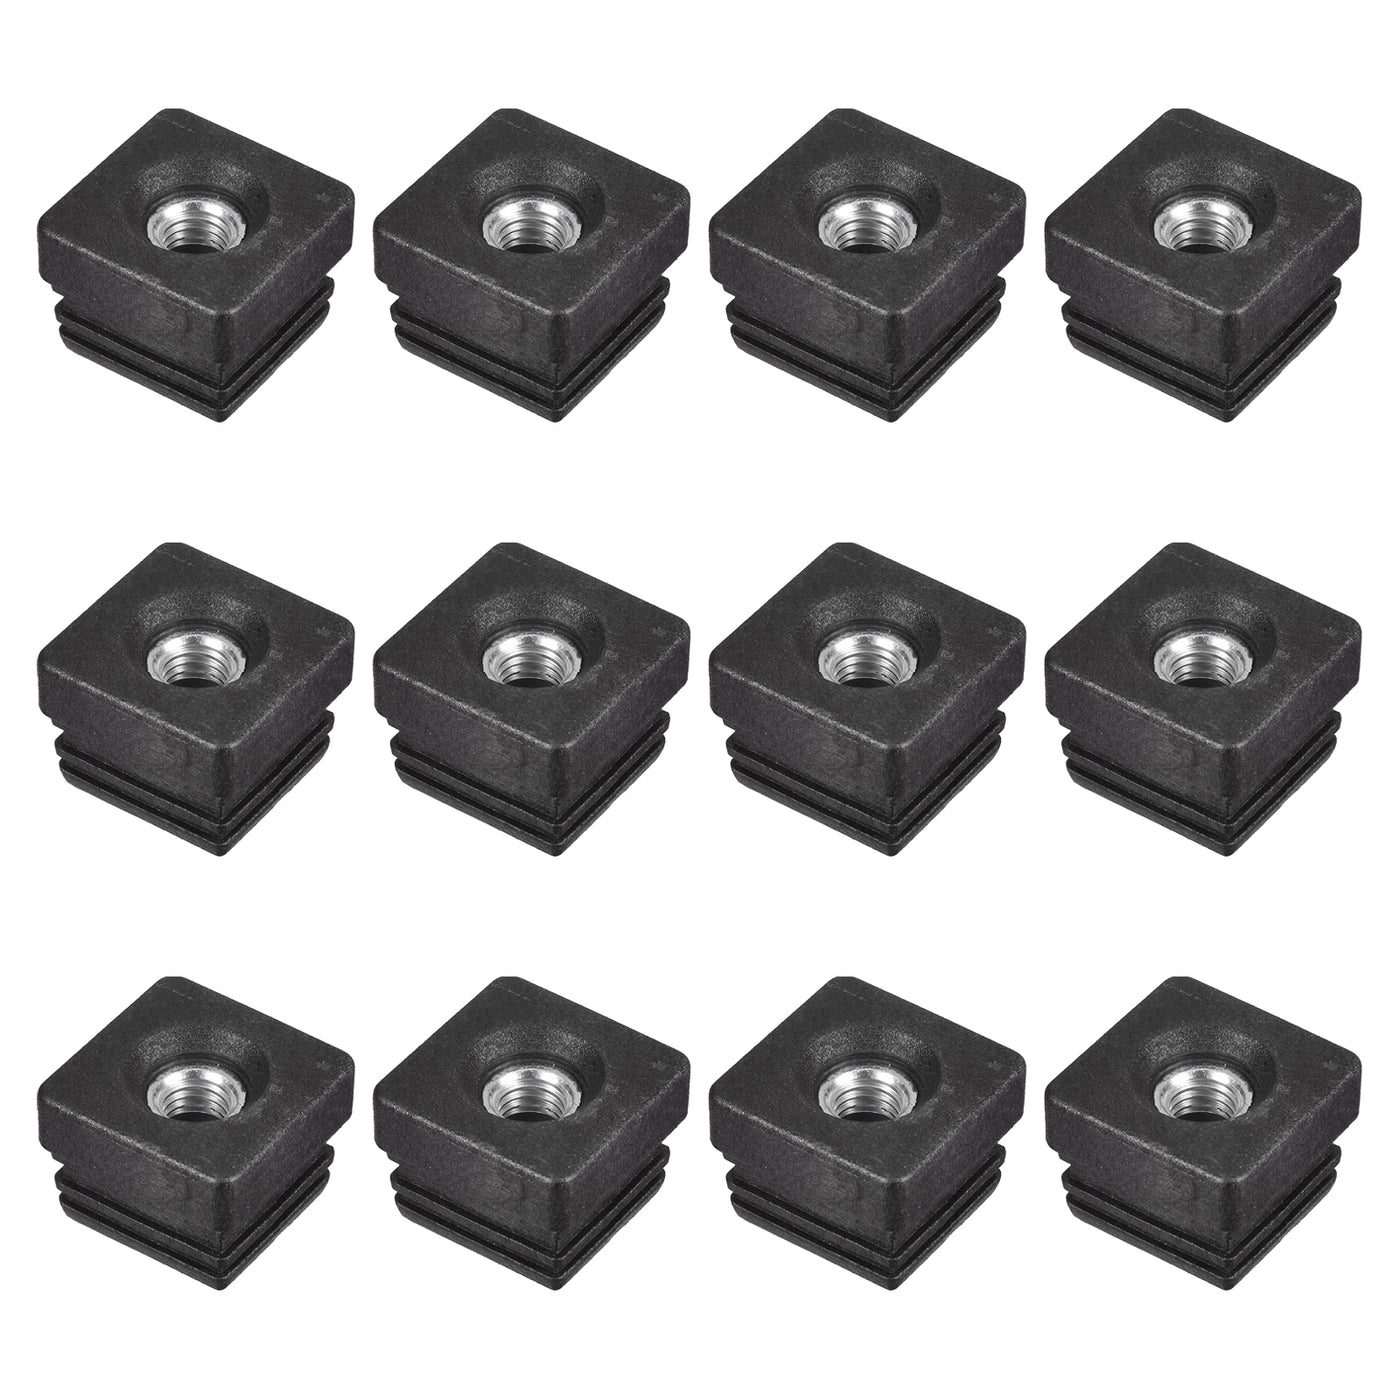 uxcell Uxcell 12Pcs 1.26"x1.26" Caster Insert with Thread, Square M10 Thread for Furniture